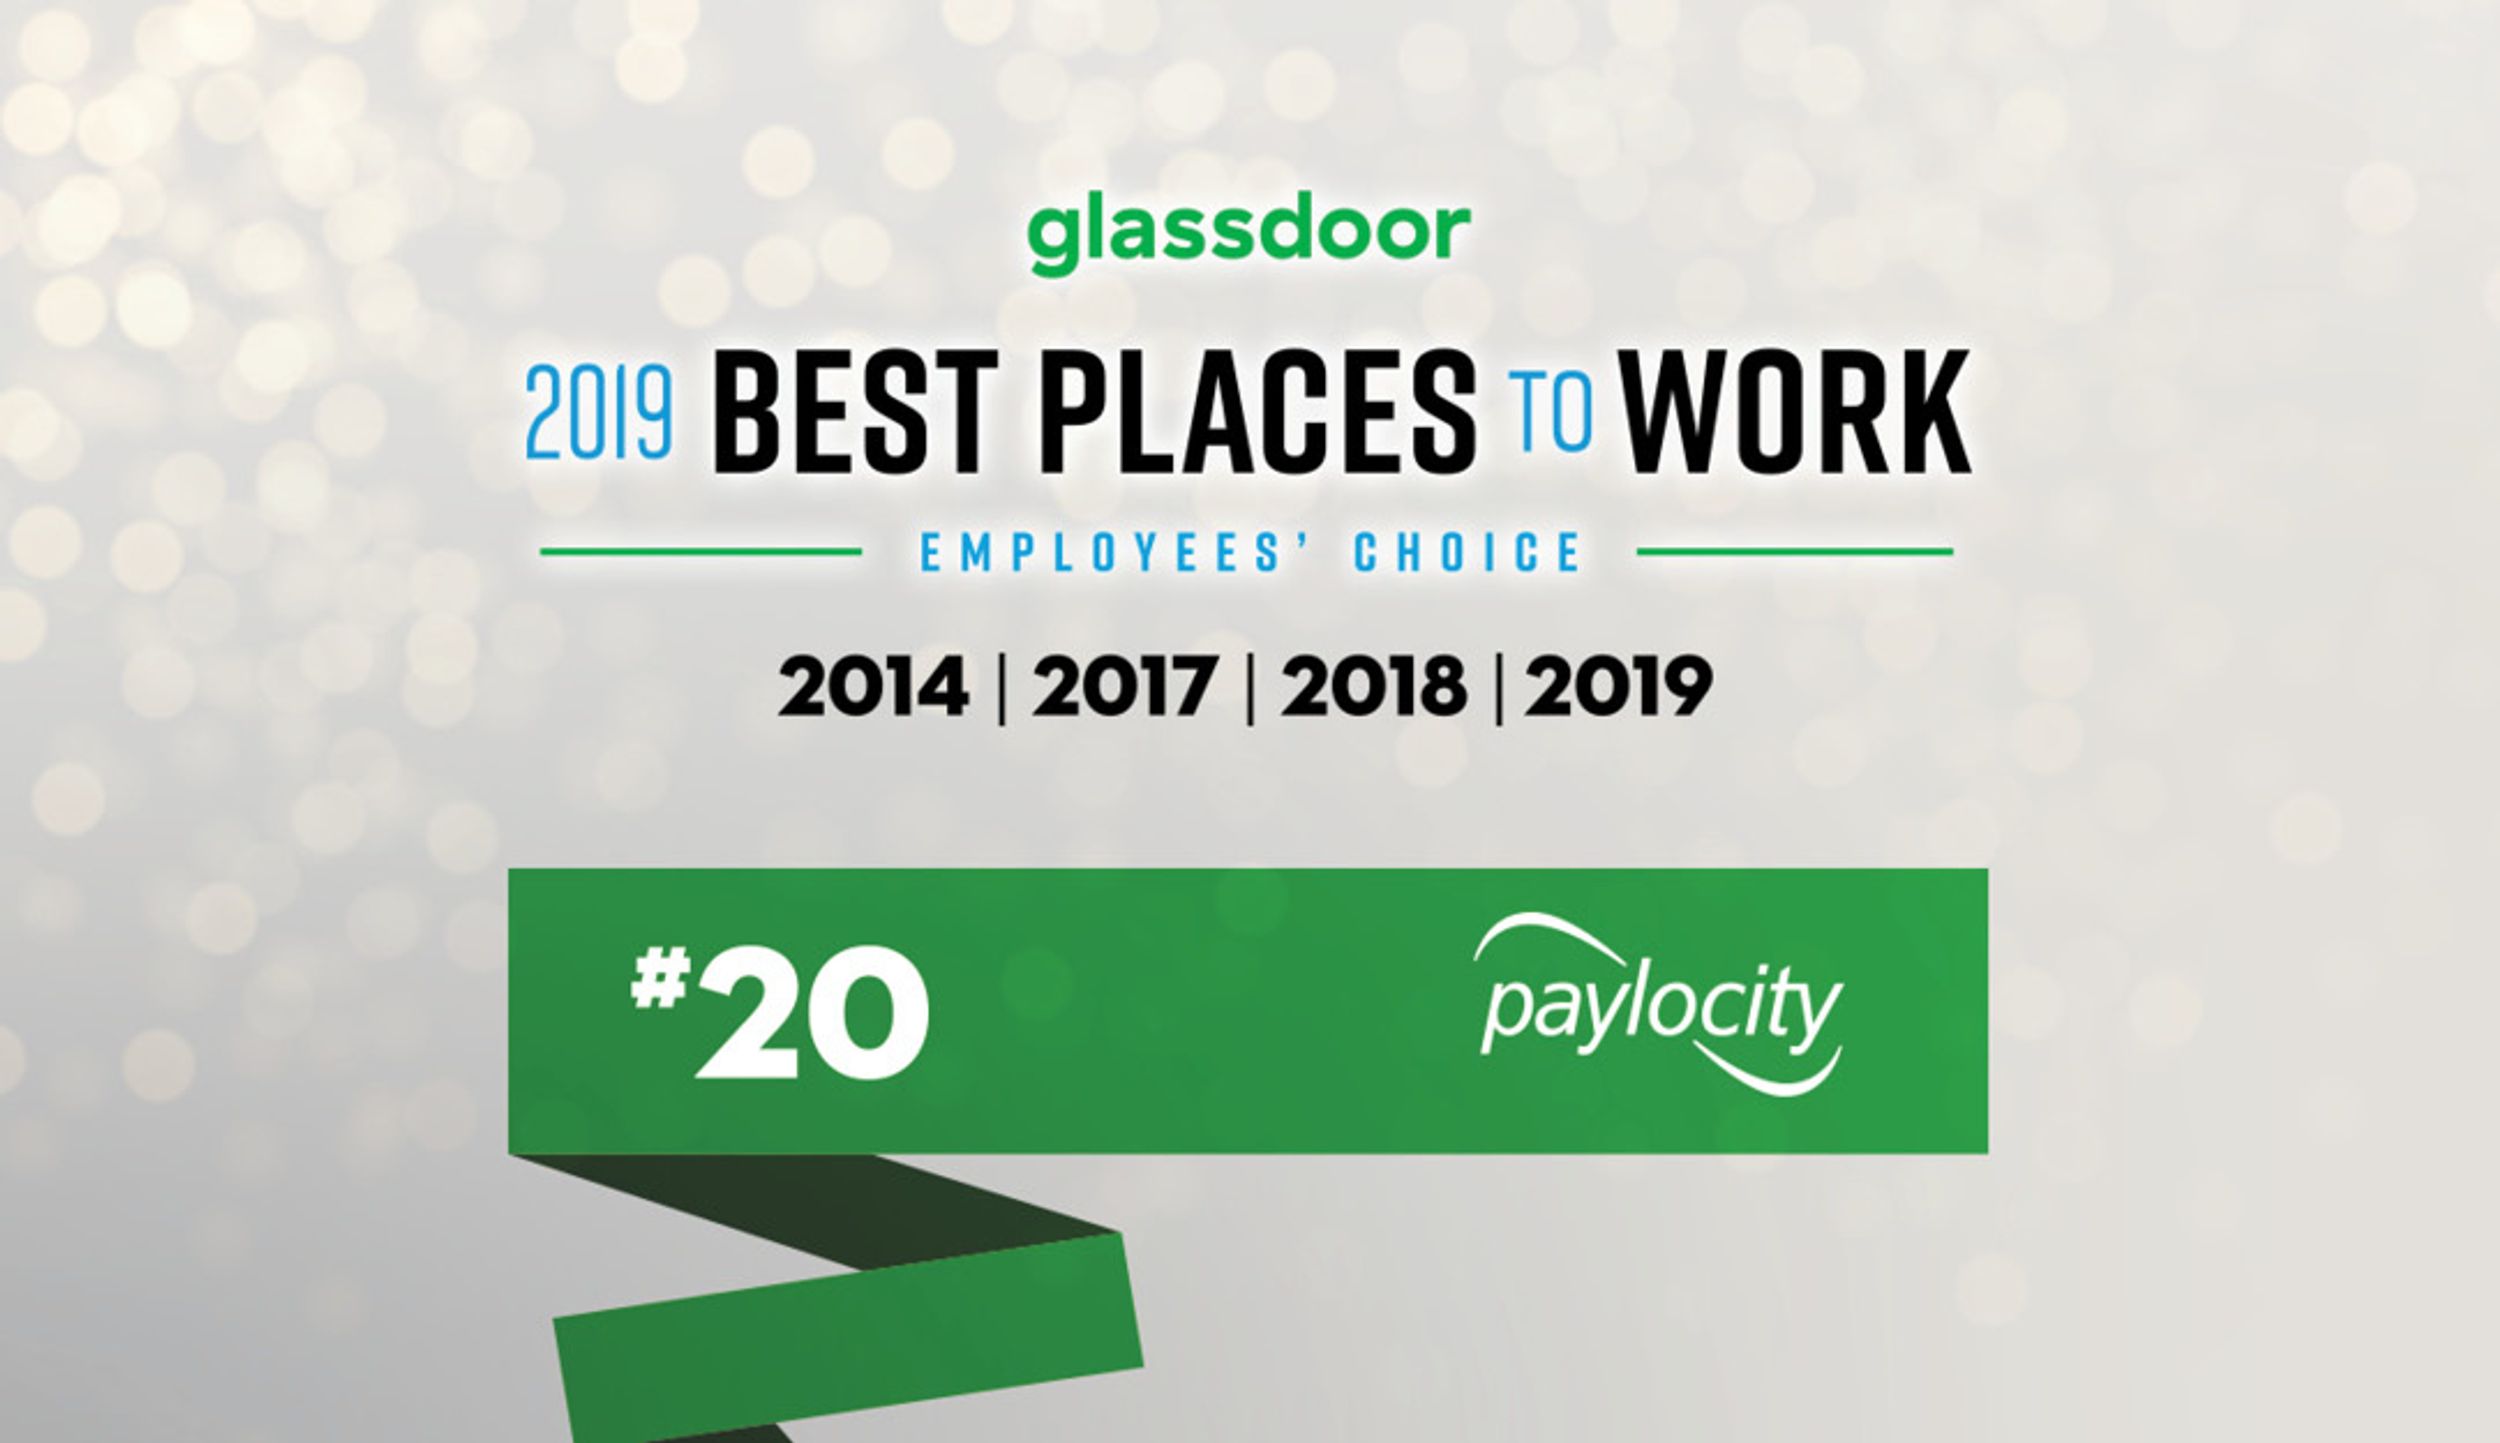 Paylocity Honored as One of the Best Places to Work in 2019, A Glassdoor Employees’ Choice Award